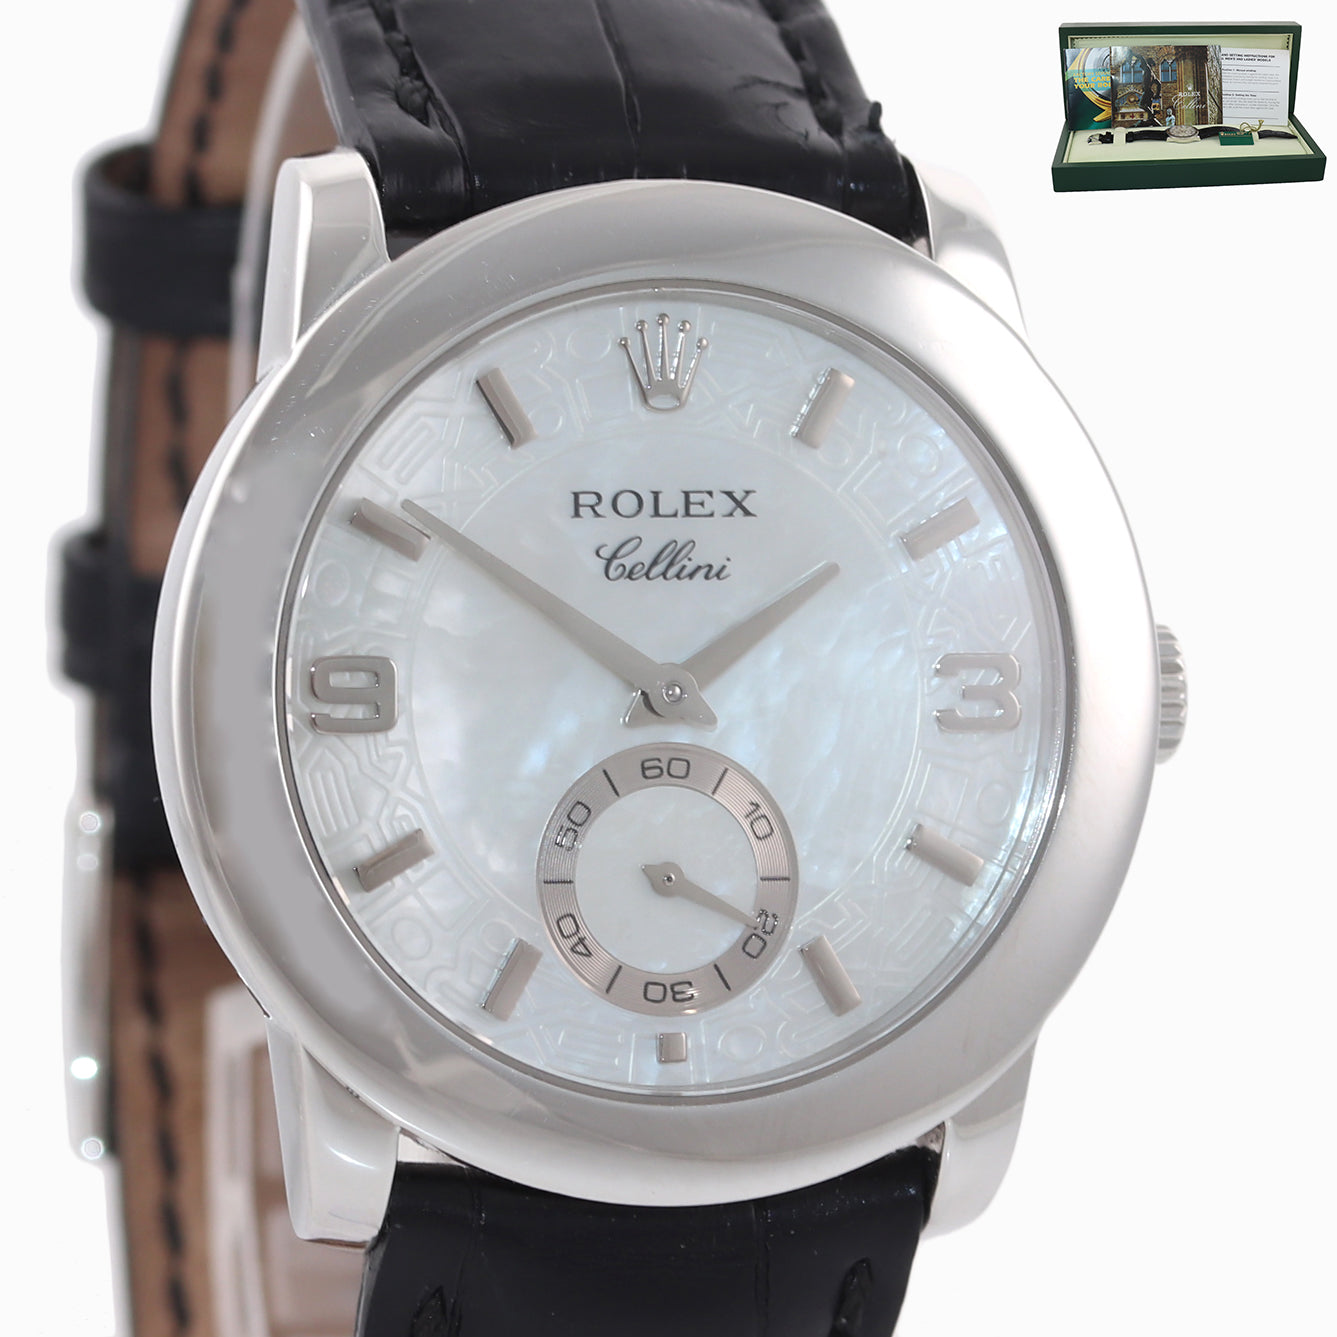 Rolex Cellini Cellinium 35mm Platinum MOP Mother of Pearl Dial Manual 5240 Watch